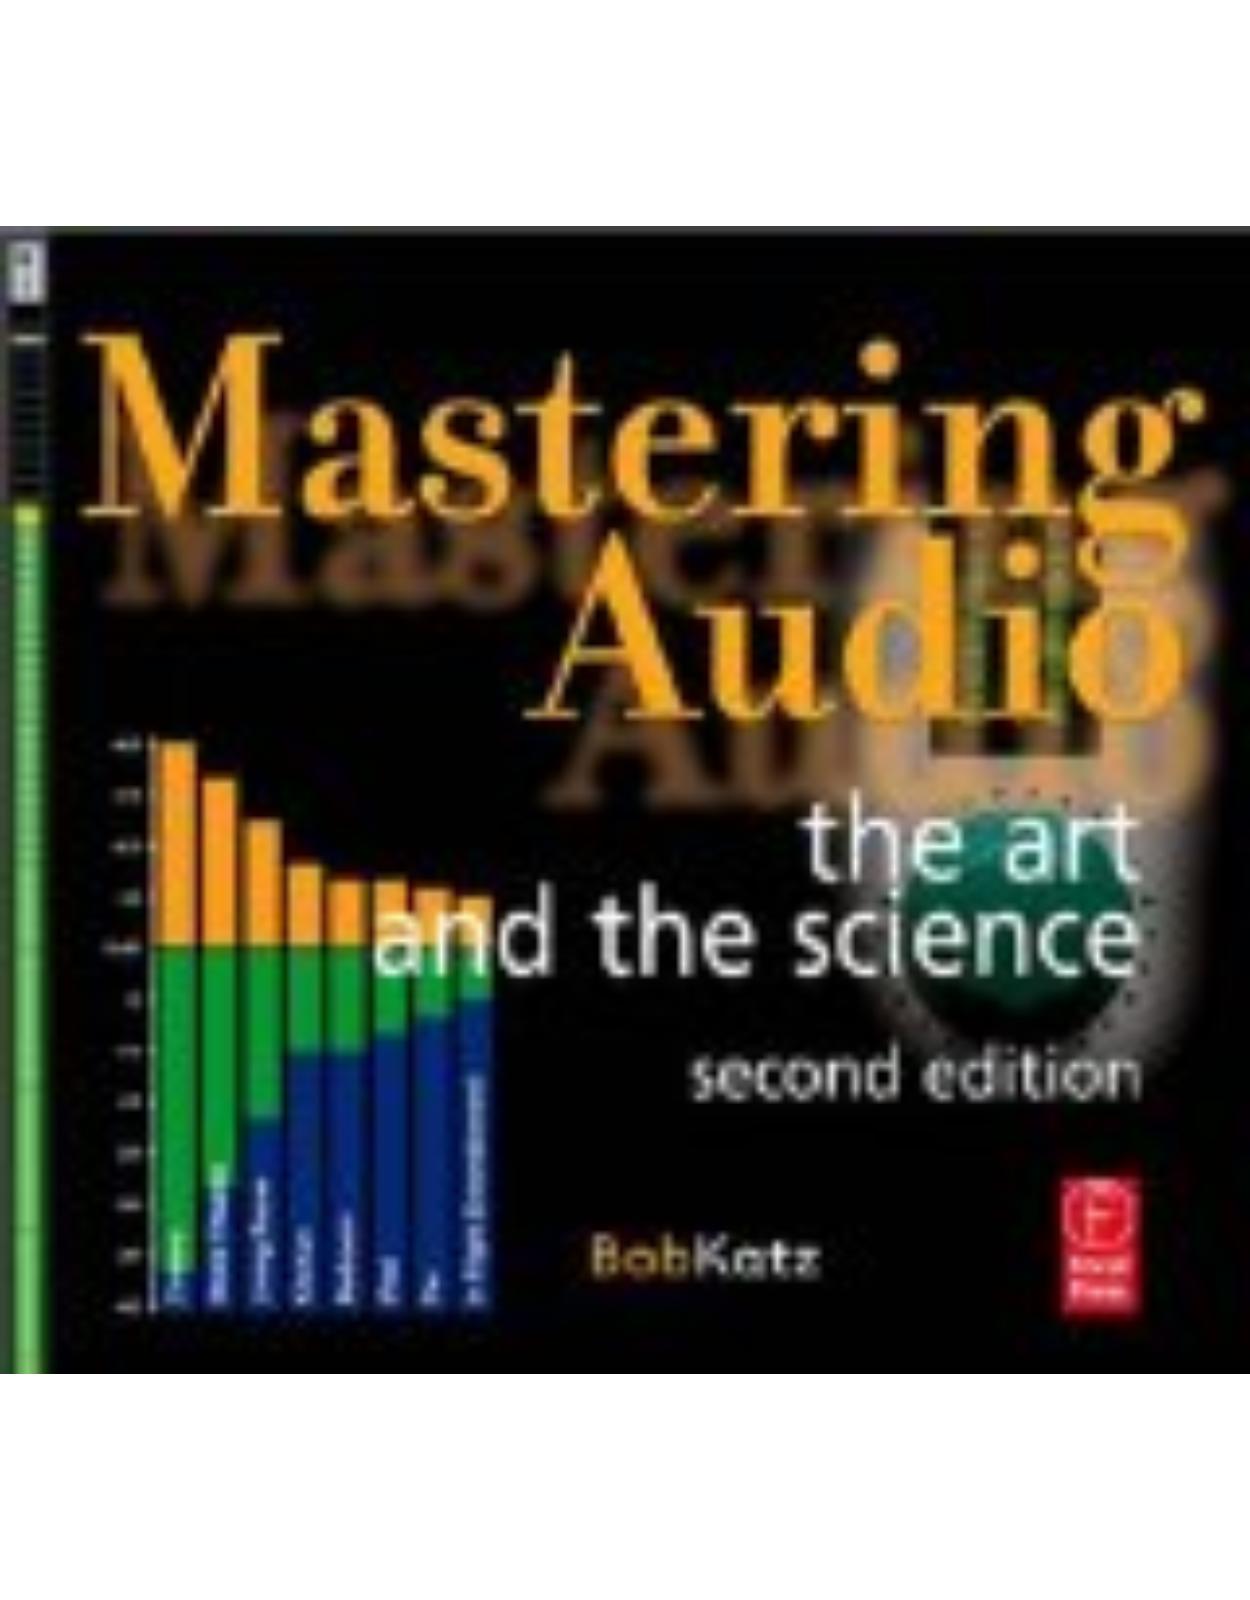 Mastering Audio: The art and the science